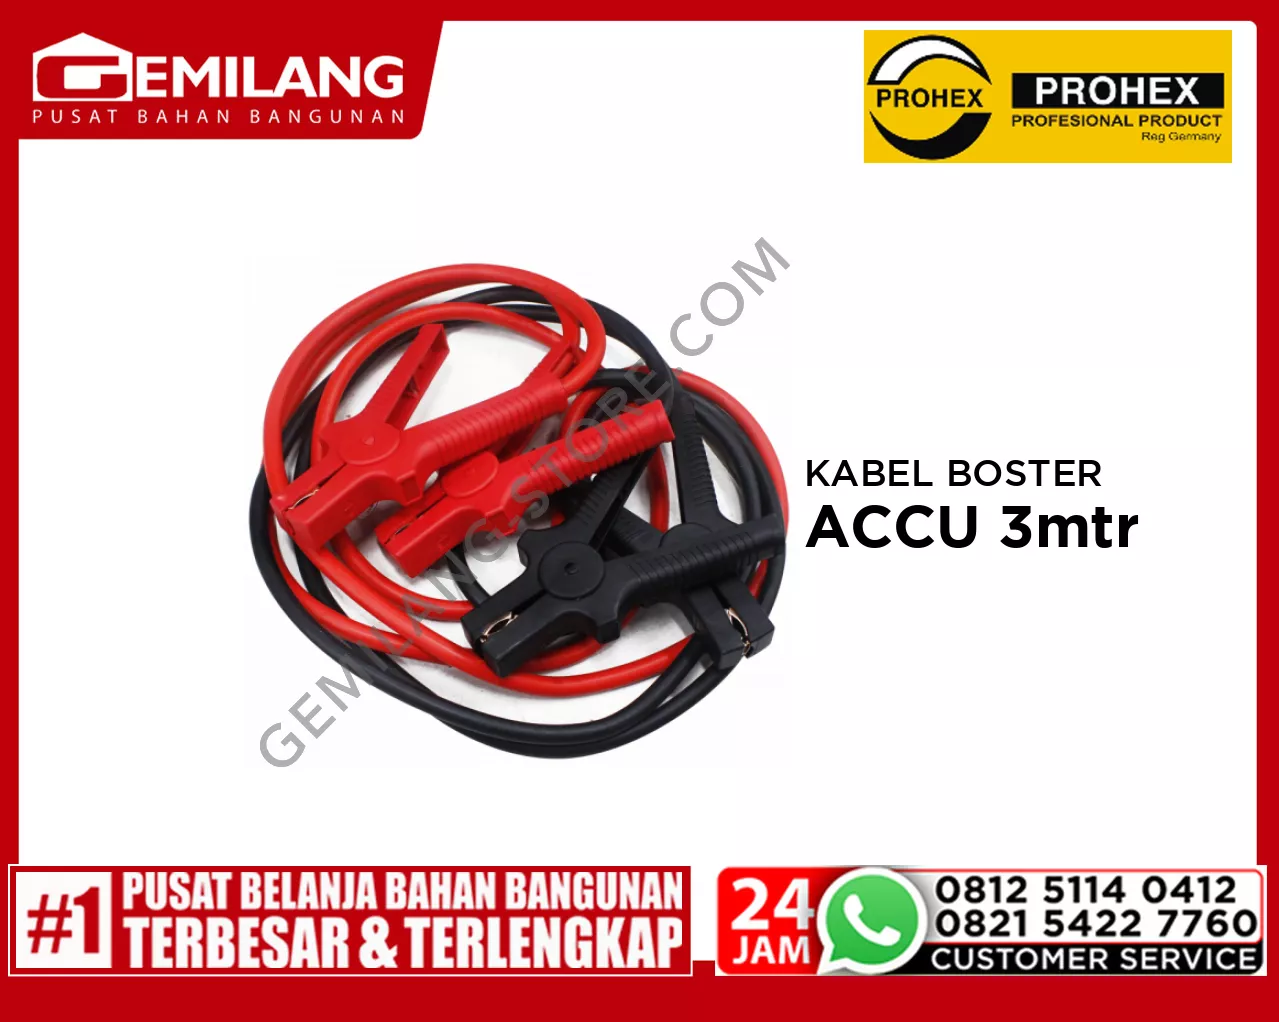 PROHEX KABEL BOSTER/ACCU 3mtr (2170-003)